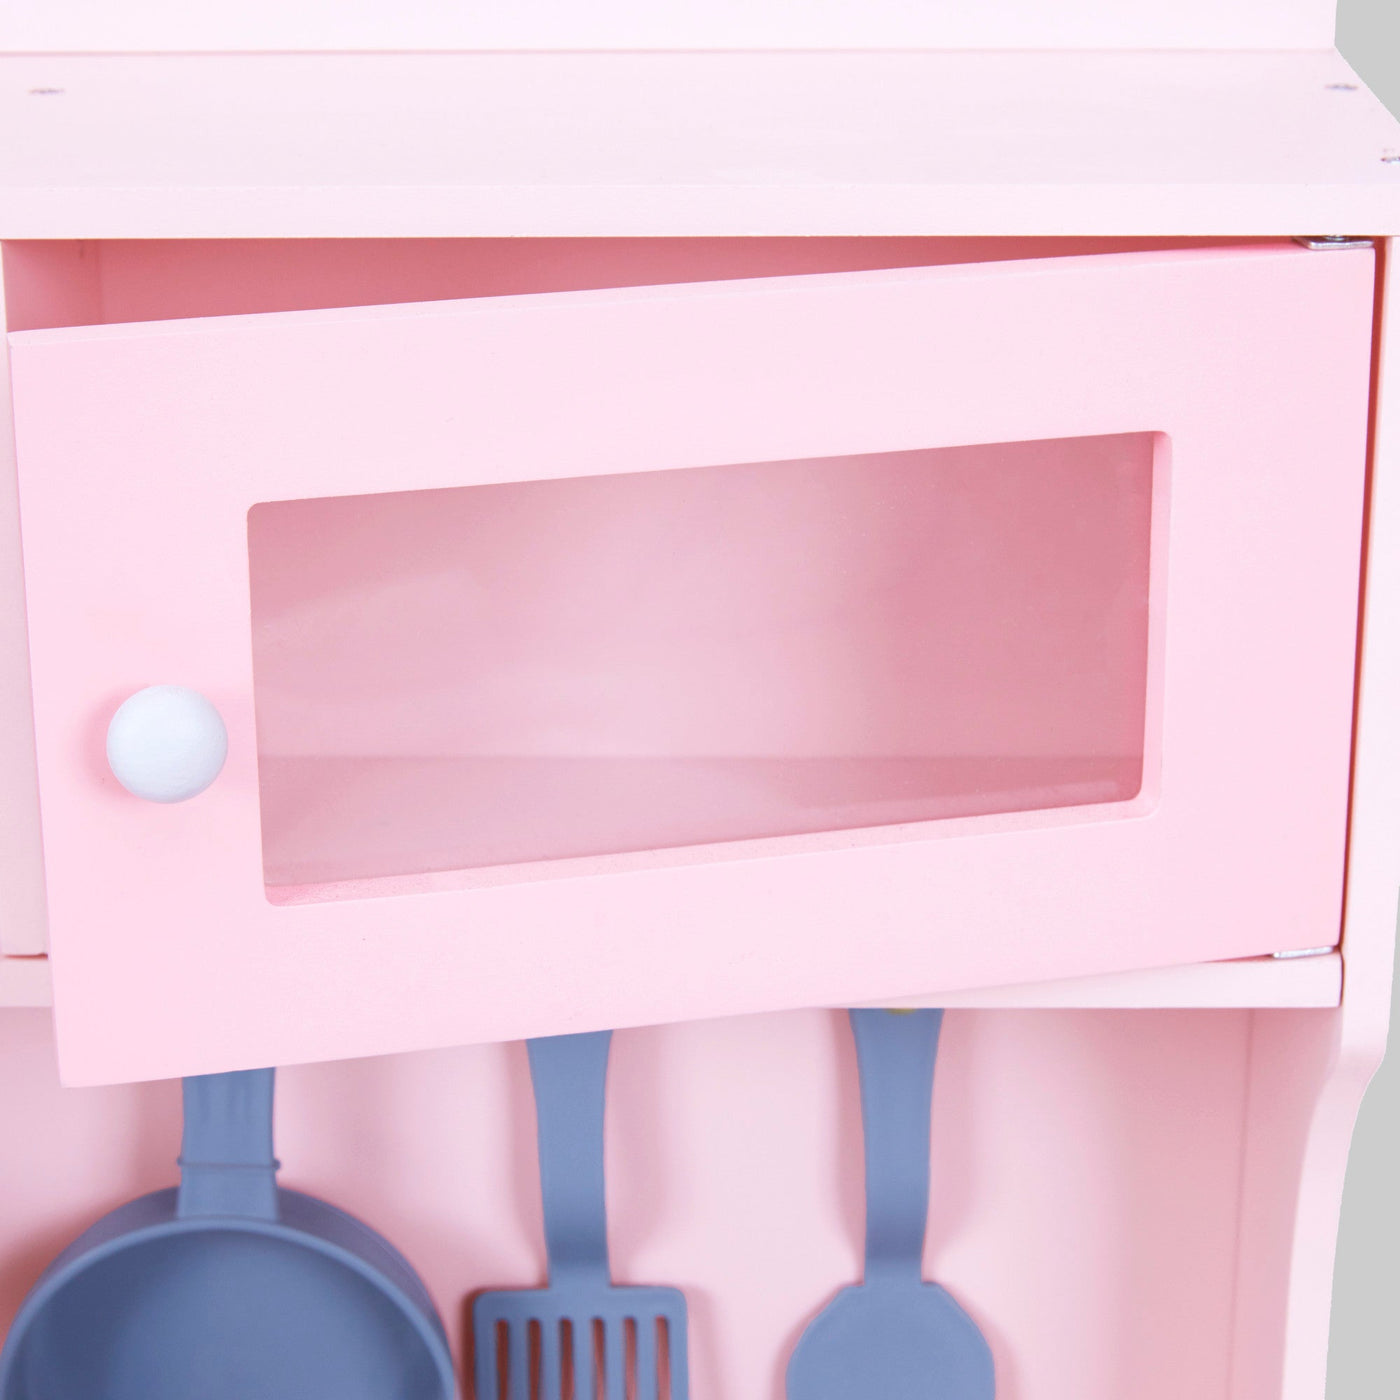 Teamson Kids Little Chef Mayfair Retro Play Kitchen with Accessories, Pink